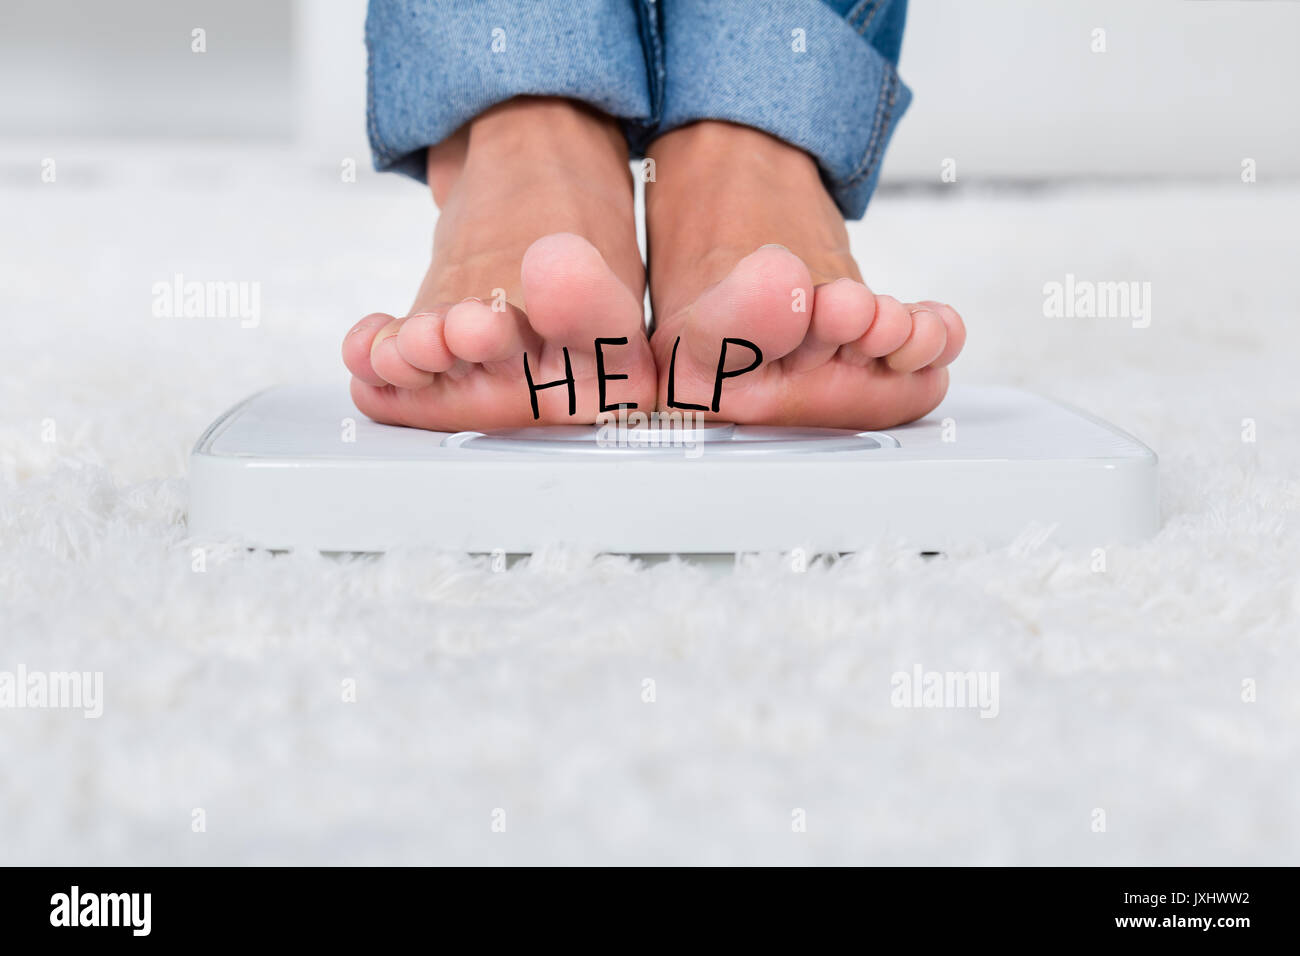 https://c8.alamy.com/comp/JXHWW2/close-up-of-person-feet-standing-on-weighing-scale-showing-help-text-JXHWW2.jpg